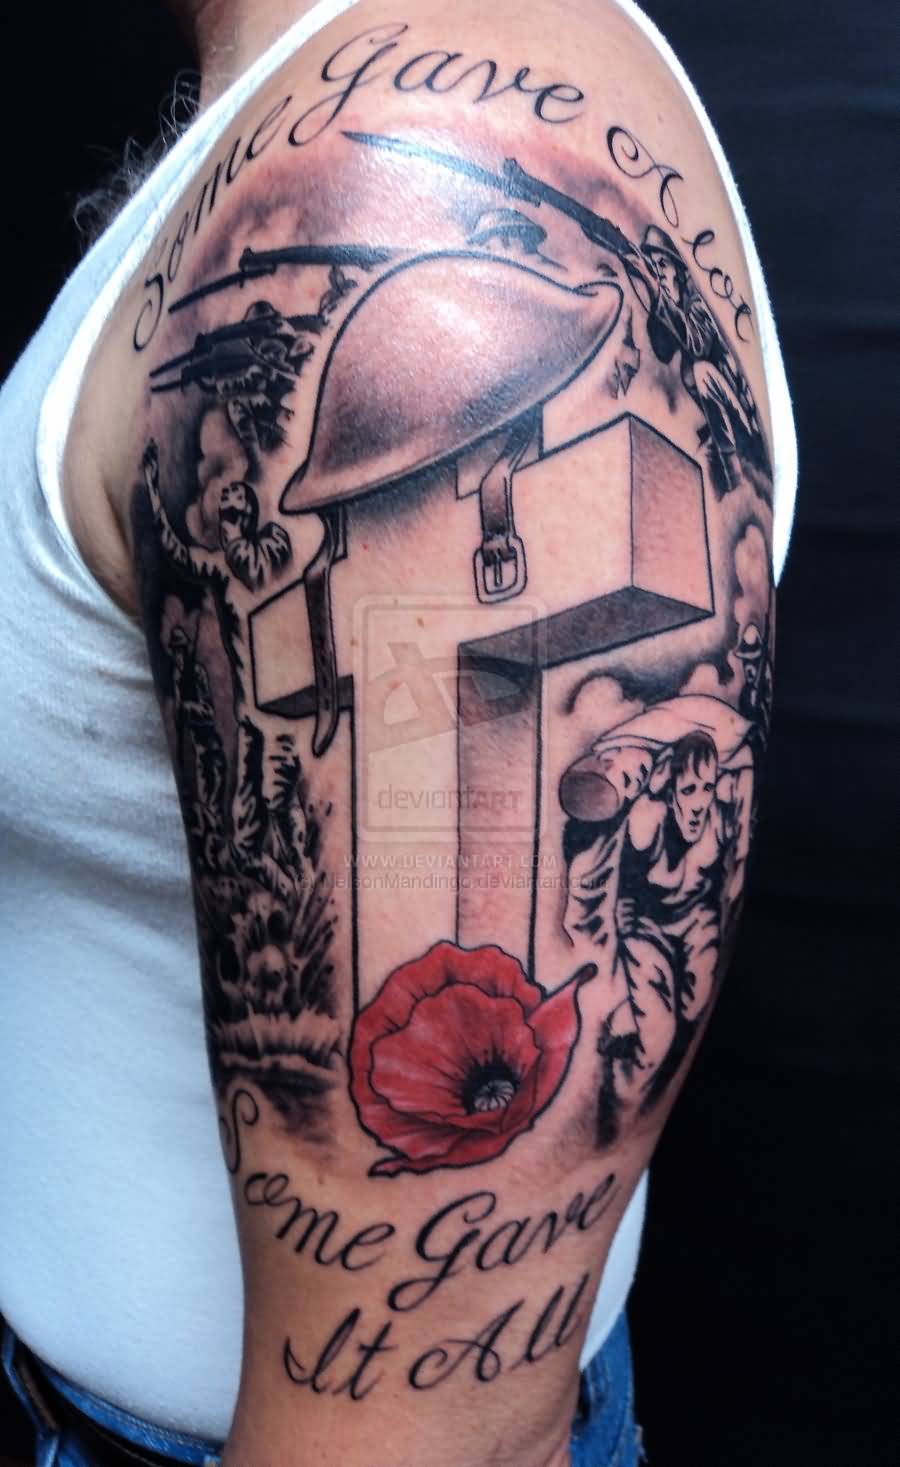 Fantastic Army Remembrance Tattoo On Side Rib By NelsonMandingo